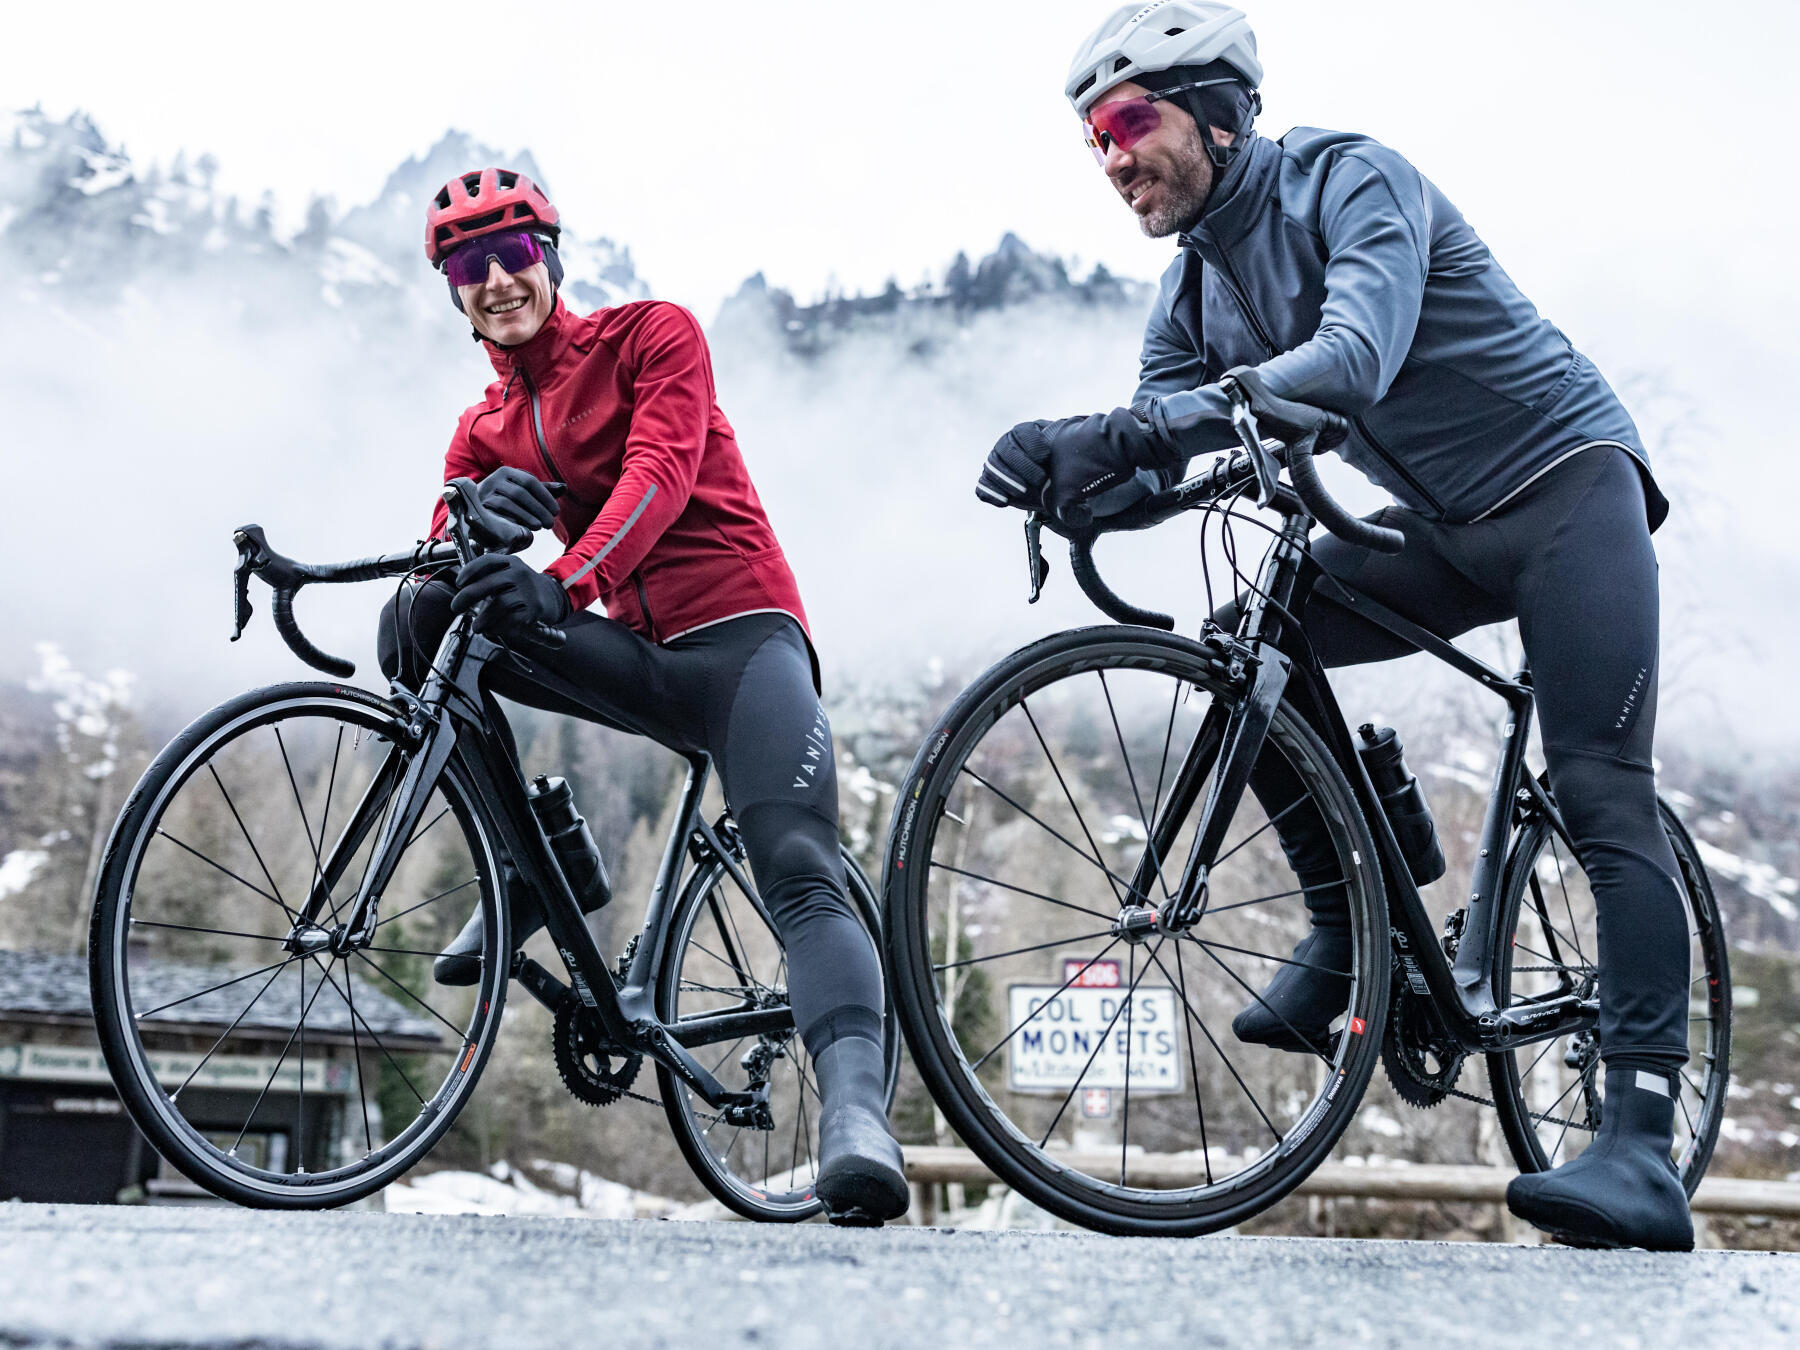 Cycle Chic®: Cycle Chic Guide #10 - Cycling in Winter